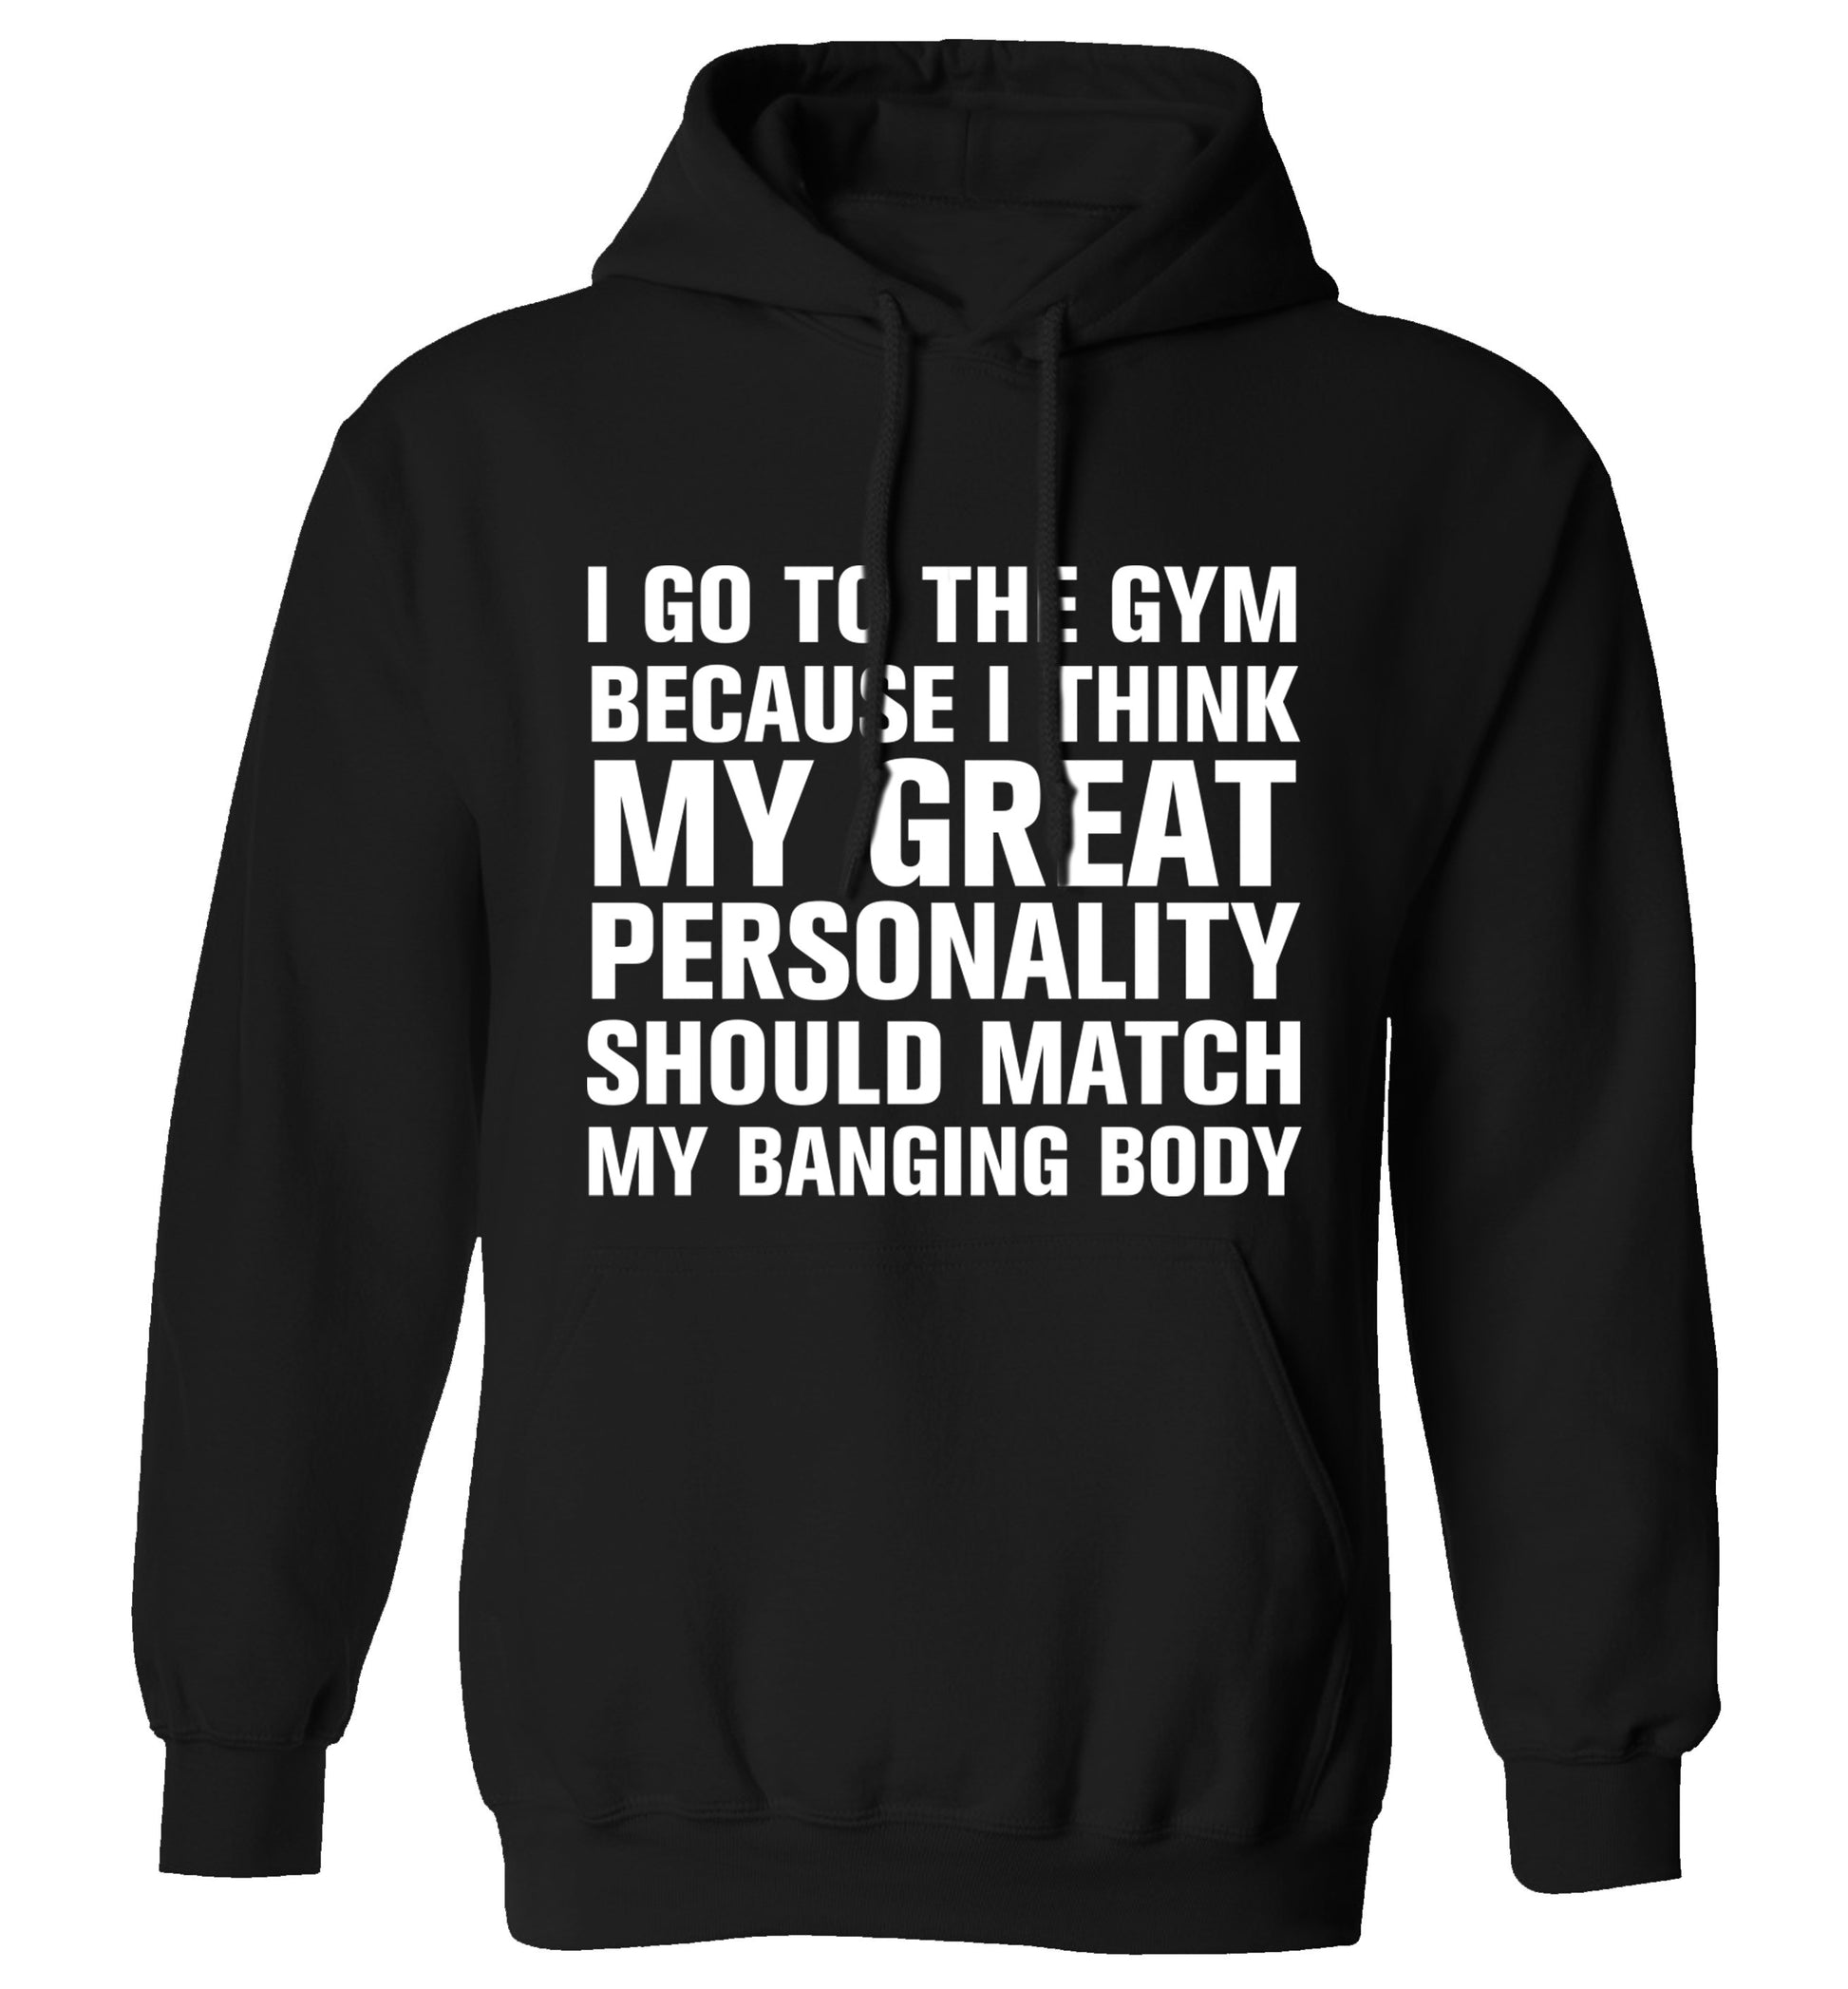 I go to the gym because I think my great personality should match my banging body adults unisex black hoodie 2XL